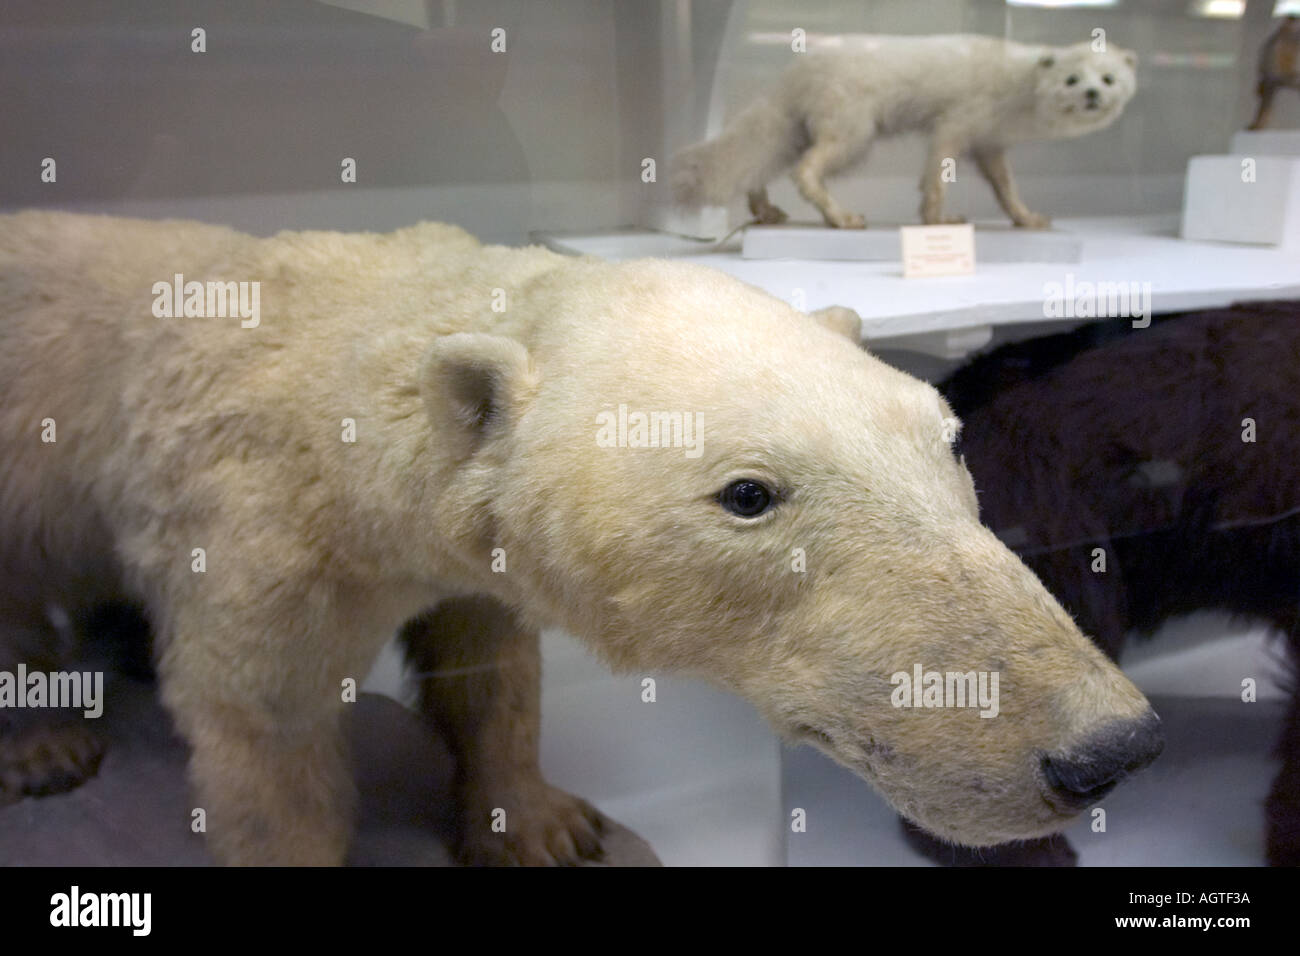 Stuffed polar bear and arctic fox exhibits in museum display cabinet Stock Photo